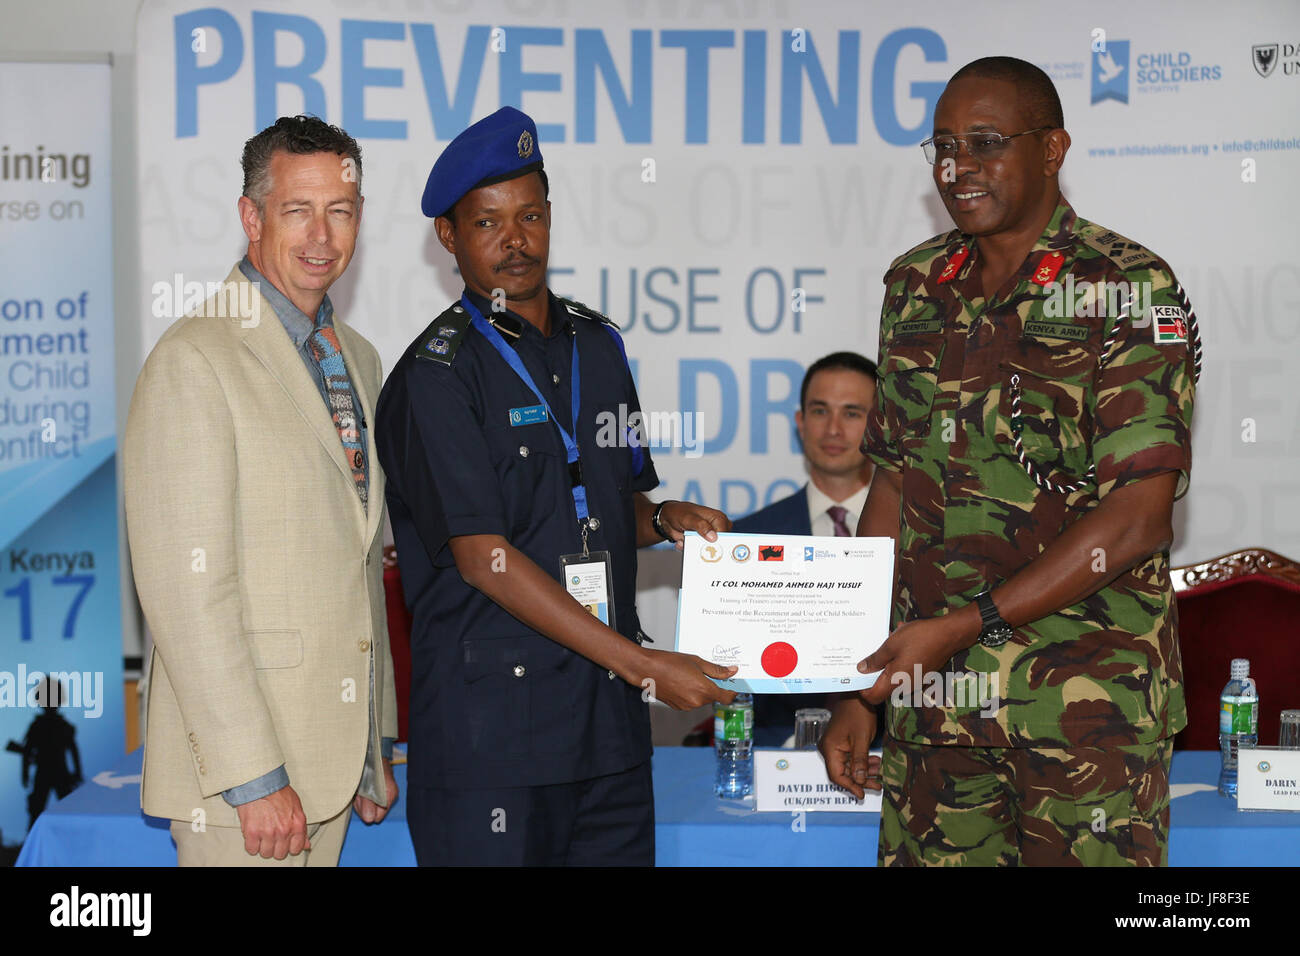 Brigadier Patrick Muta Nderitu (right) the Director of the International Peace and Security Training Centre (IPSTC) and Darin Reeves (left), the Lead Facilitator of the Romeo Dallaire Child Soldiers Initiative, present a certificate to Lt. Col. Mohamed Ahmed Haji Yusuf from Somalia after successful completion of the AMISOM Training of Trainers course on the prevention of the recruitment and use of children as weapons of war, for security sector actors at the International Peace and Security Training Centre, Nairobi, Kenya on May 19, 2017. AMISOM Photo Stock Photo